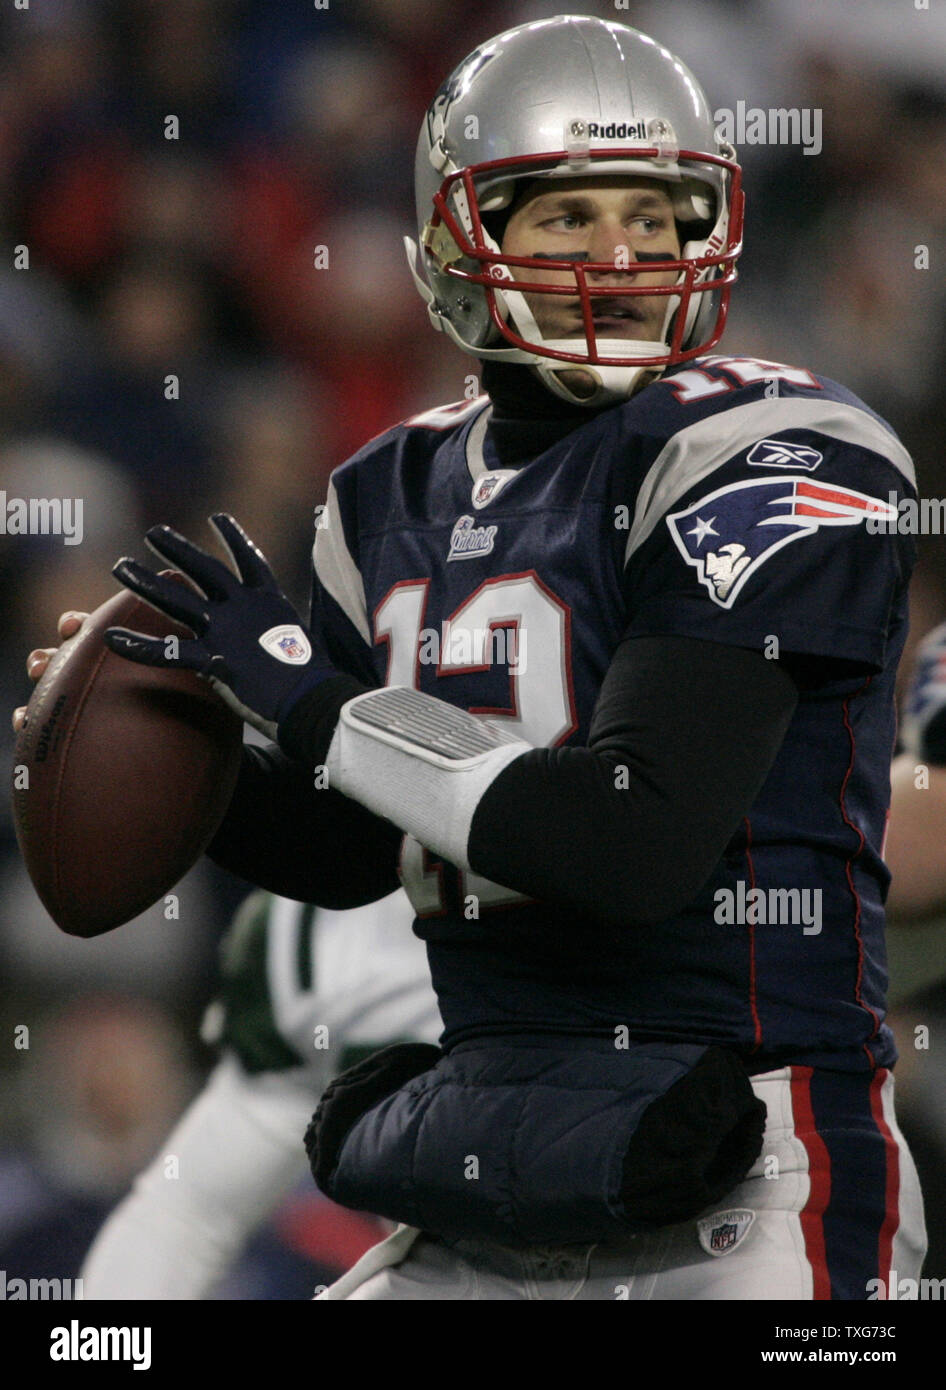 New England Patriots quarterback Tom Brady drops back for a pass in the first quarter of the AFC division playoff game against the New York Jets at Gillette Stadium in Foxboro, Massachusetts on January 16, 2011.    UPI/Matthew Healey Stock Photo